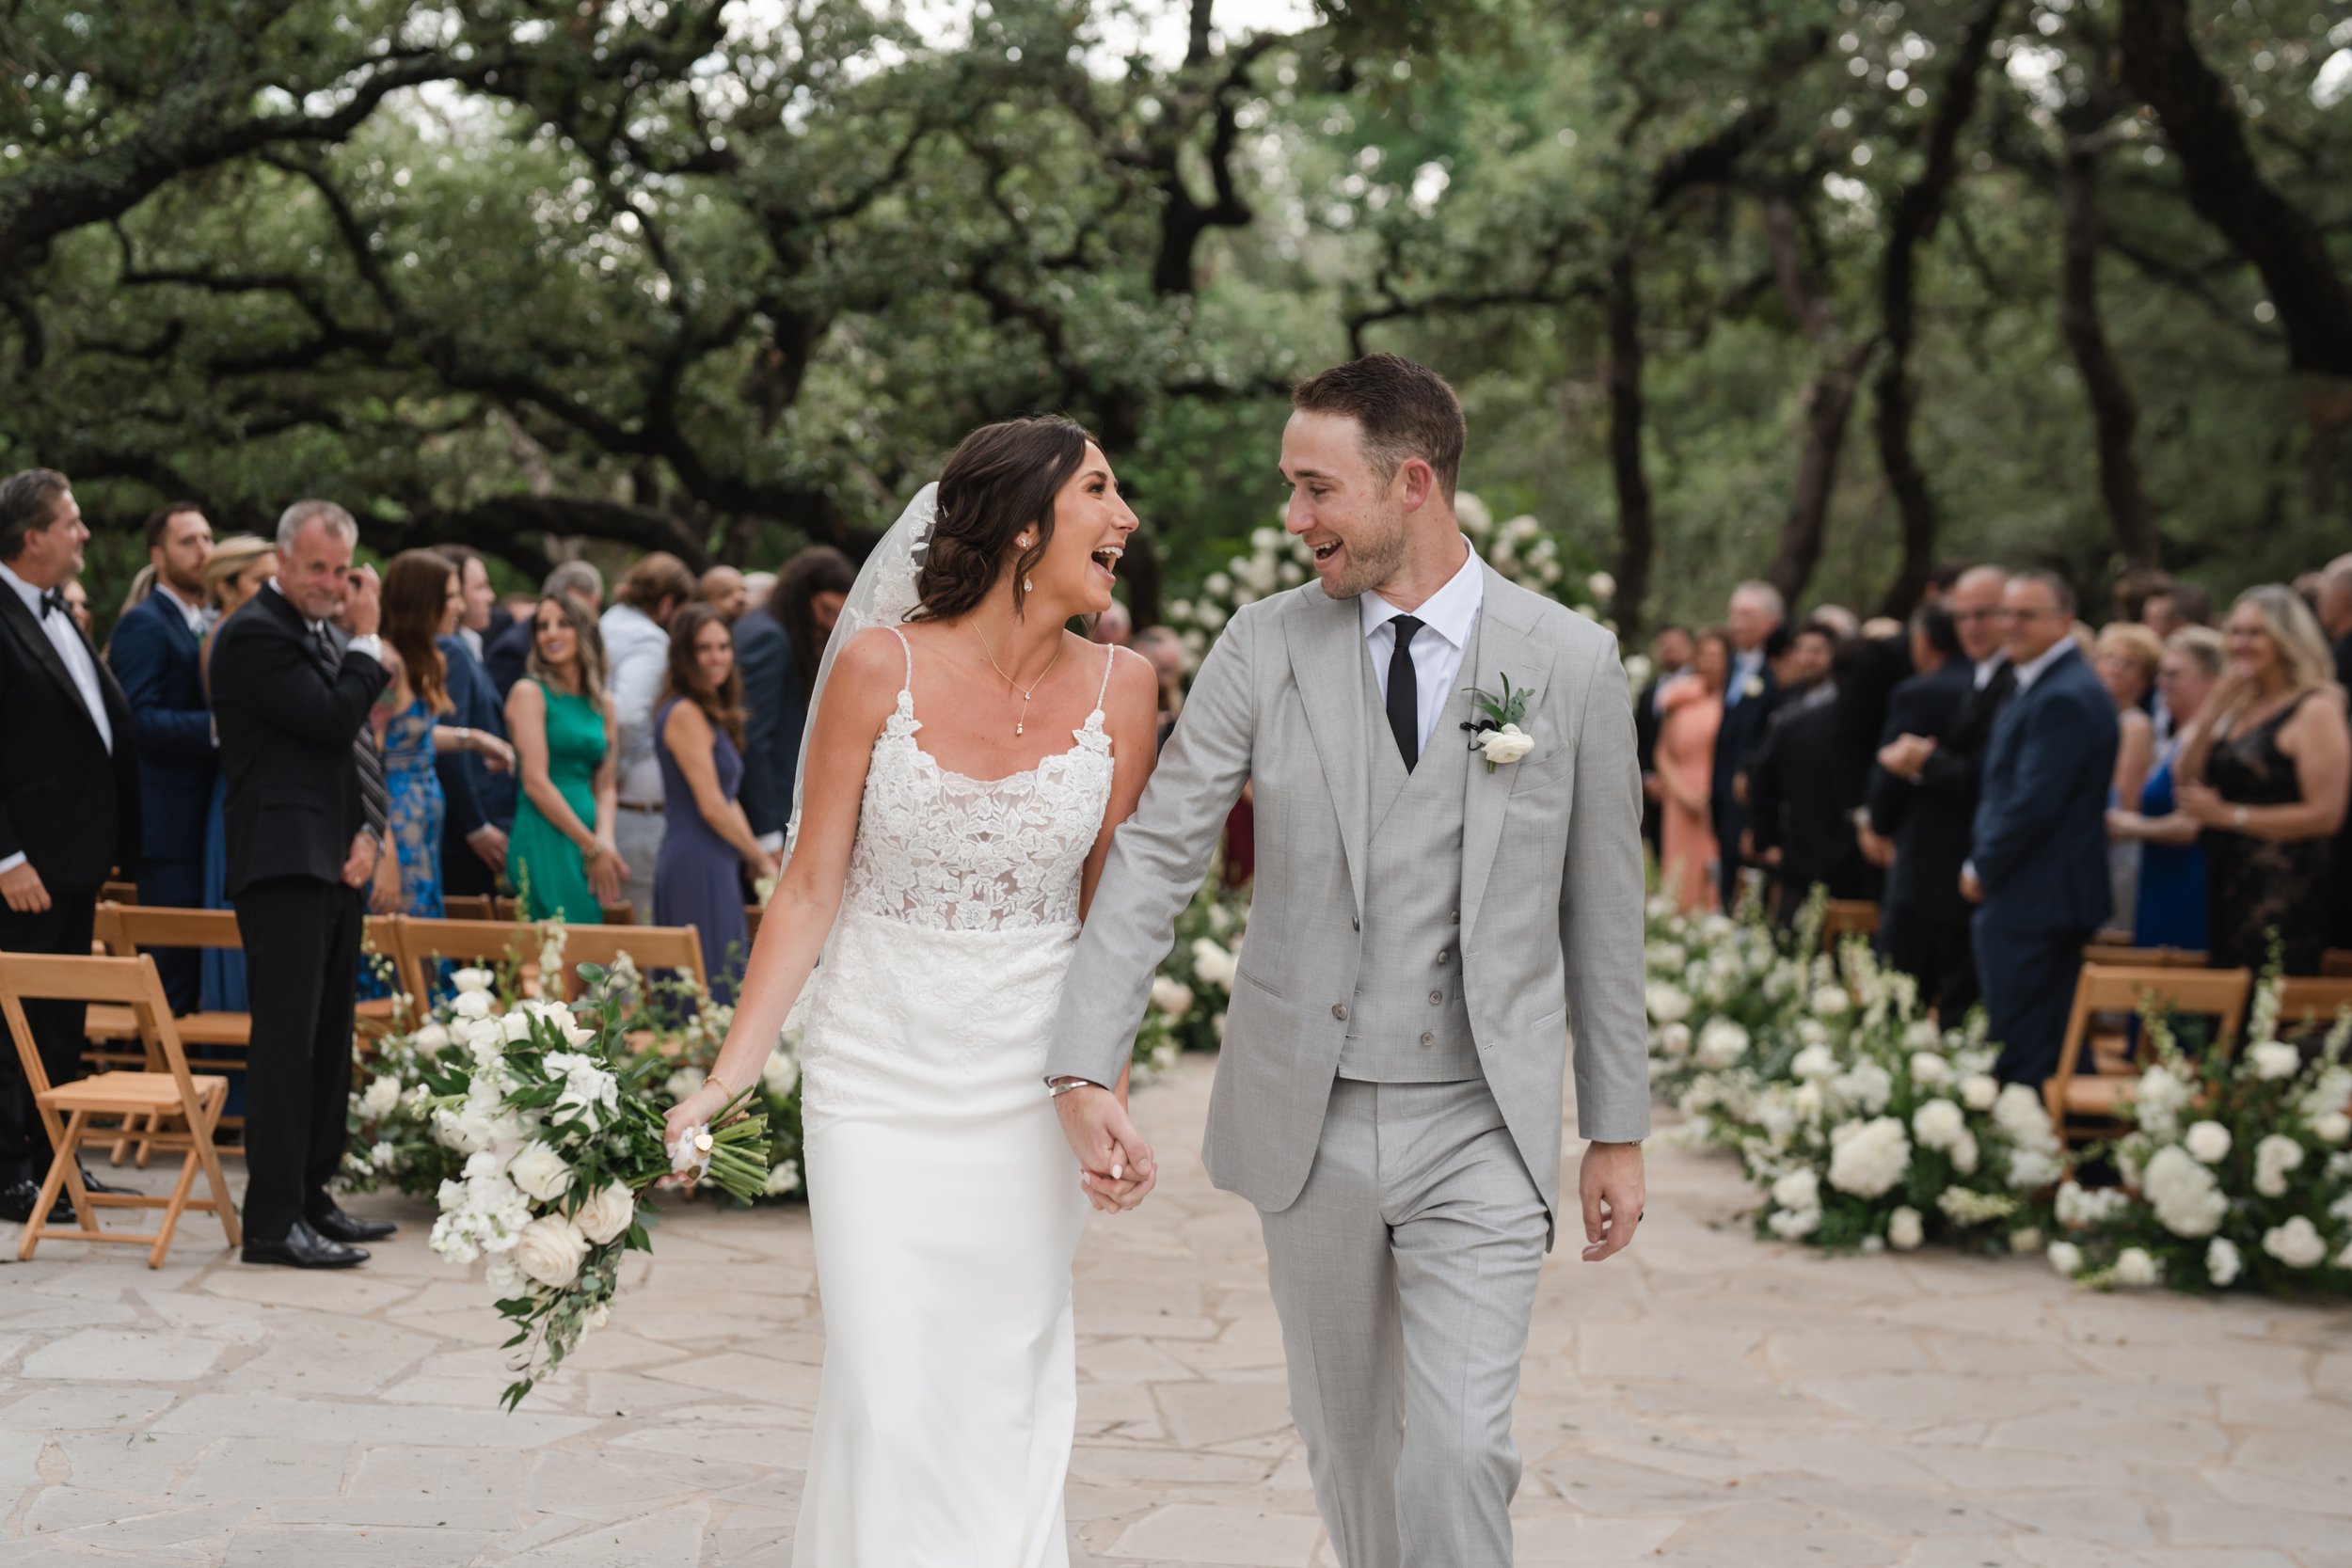 Preserving Love in Austin: Wedding Photo and Video Perfection